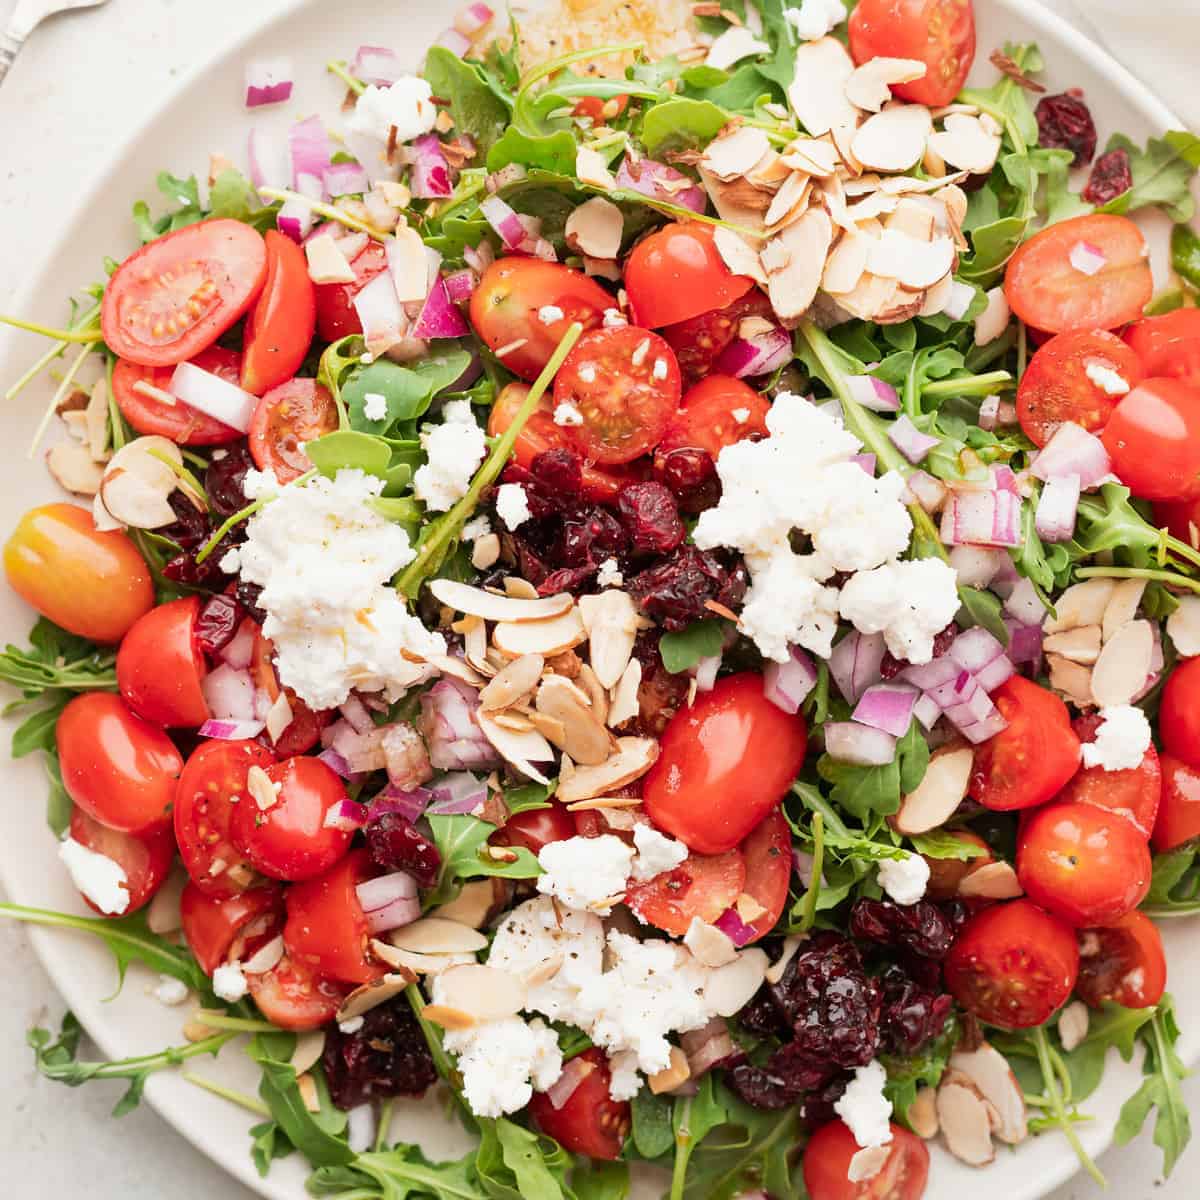 Arugula Pasta Salad with Goat Cheese and Tomato